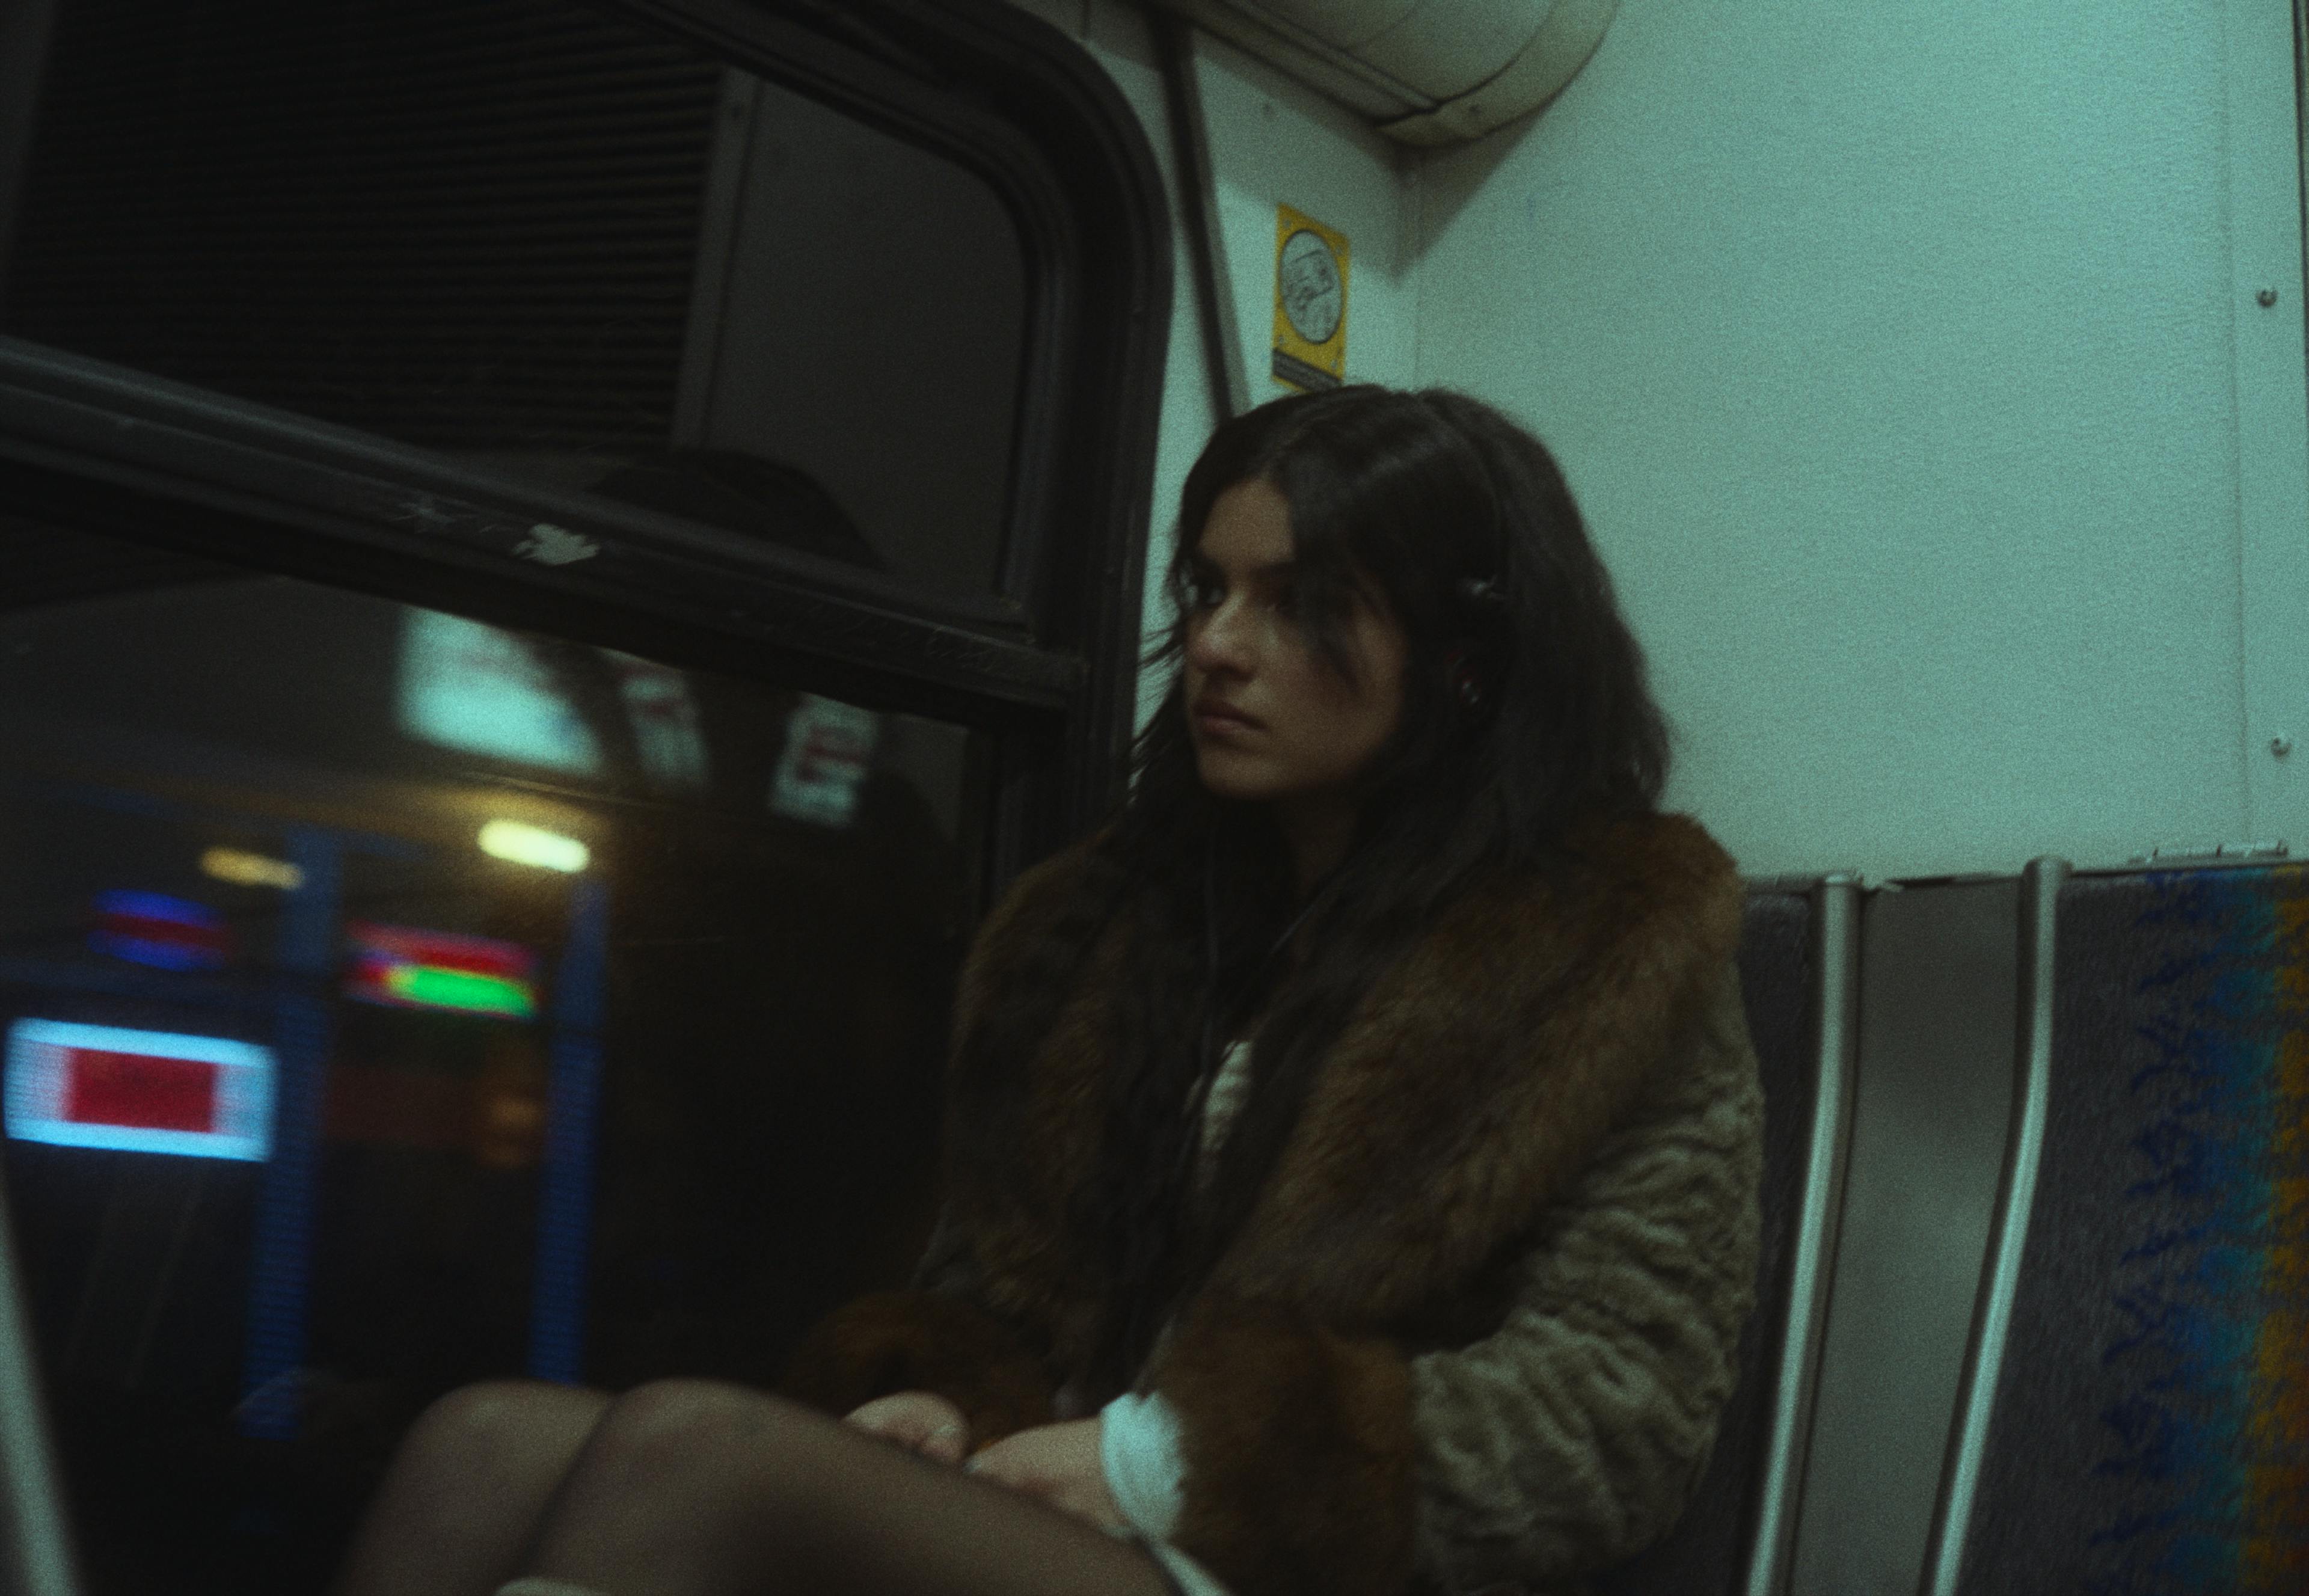 A young woman, Ren, seated inside a bus at night. She is wearing a large, fluffy brown faux fur coat, and her long, dark hair is partly obscuring her face.